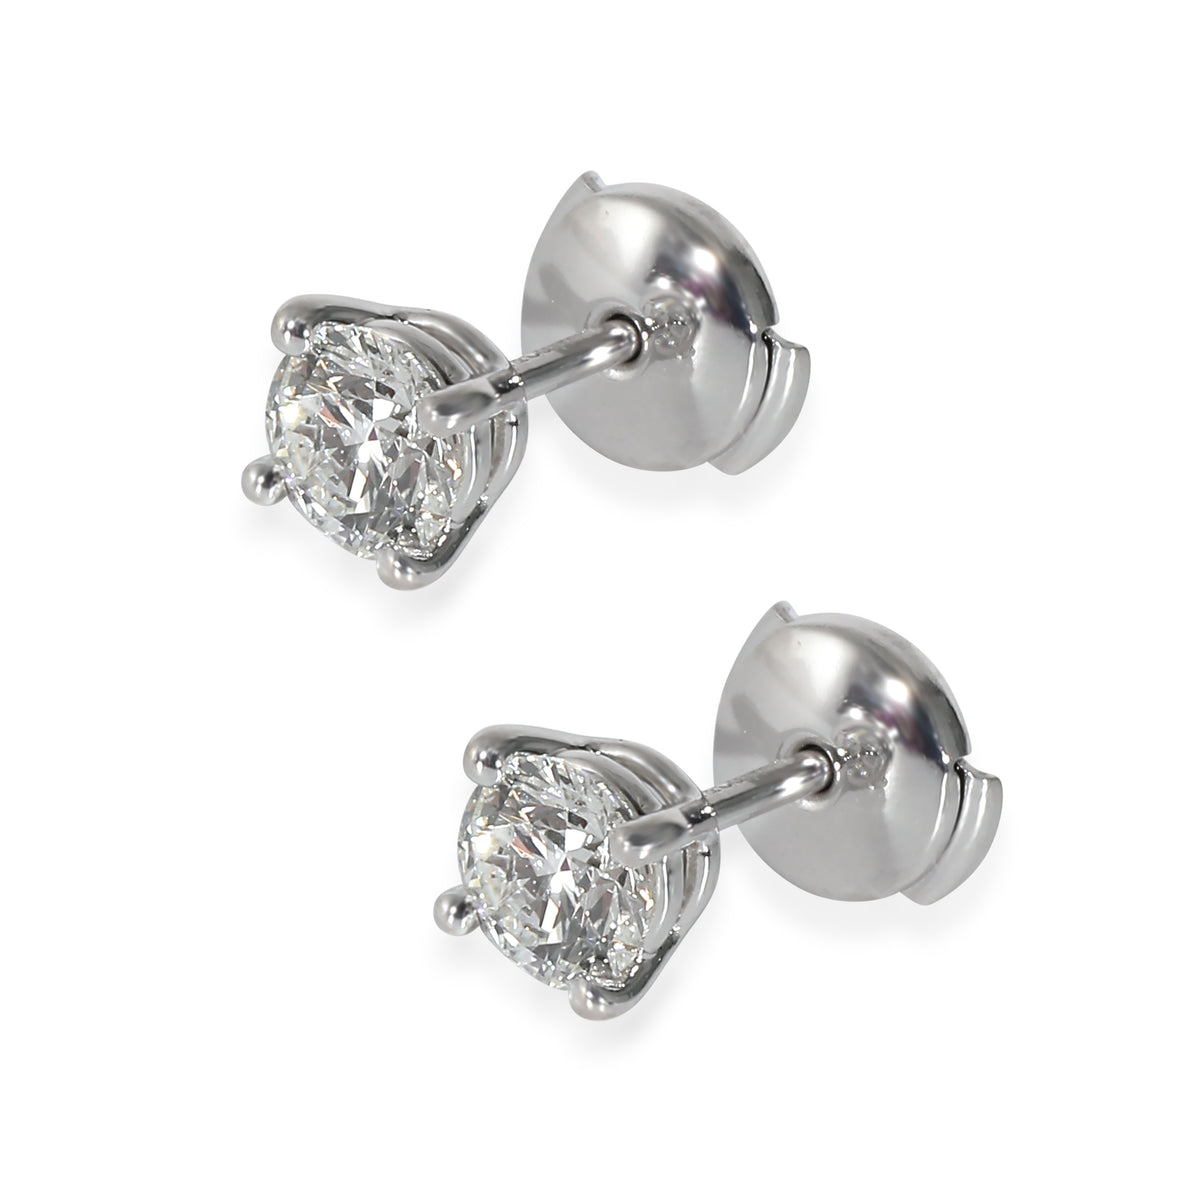 Tiffany & Co. Solitaire 4 Prong Diamond Earrings in  Platinum 1.32 CTW